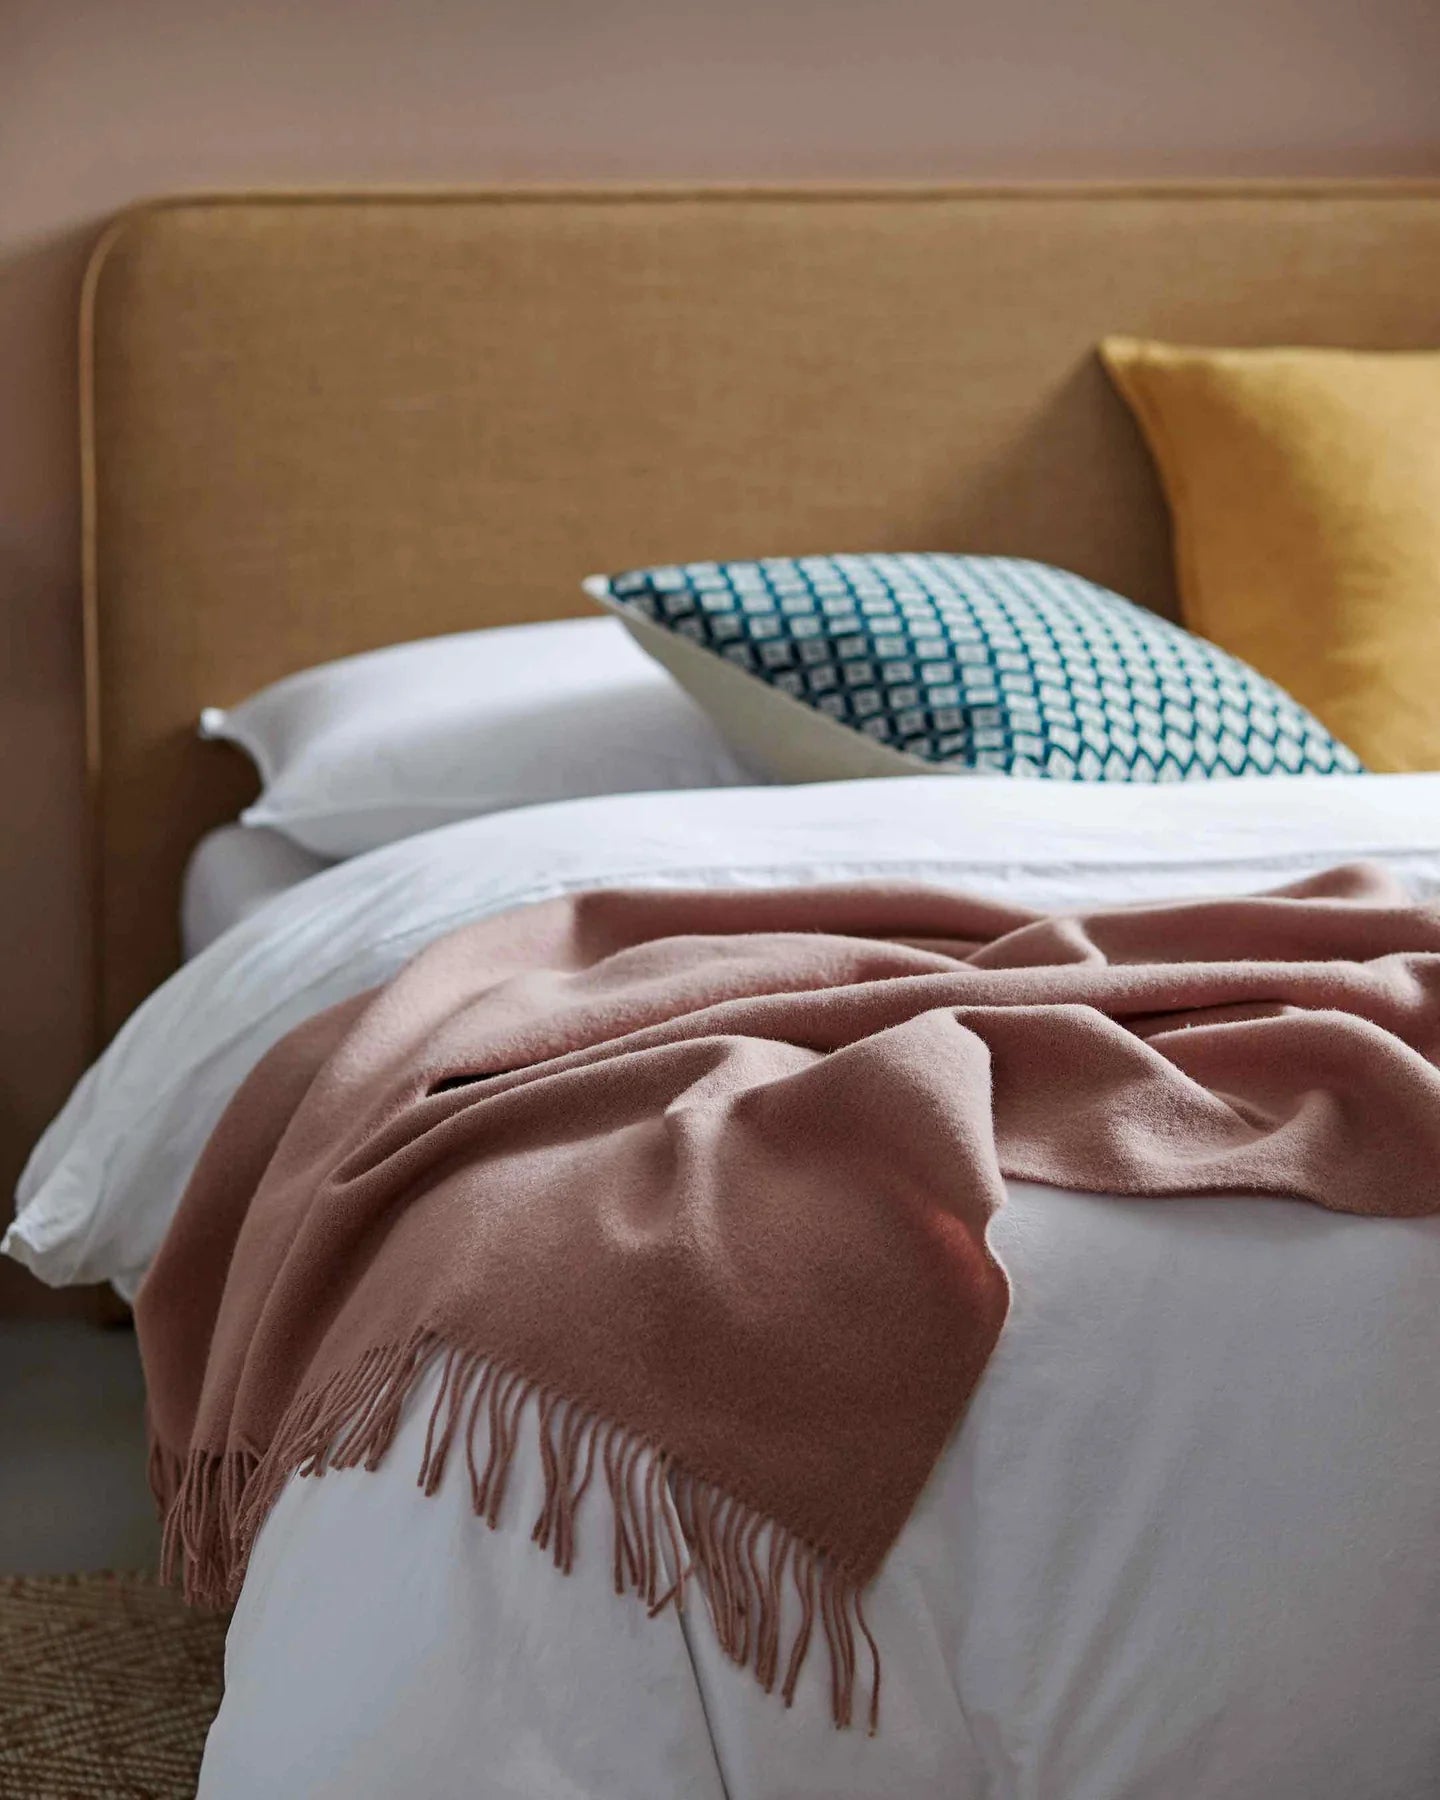 Made from 100% New Zealand lambswool, Nevis throw blankets in rose are simply luxurious. All of our throws make the perfect companion over cooler days and nights, and can also be enjoyed outdoors